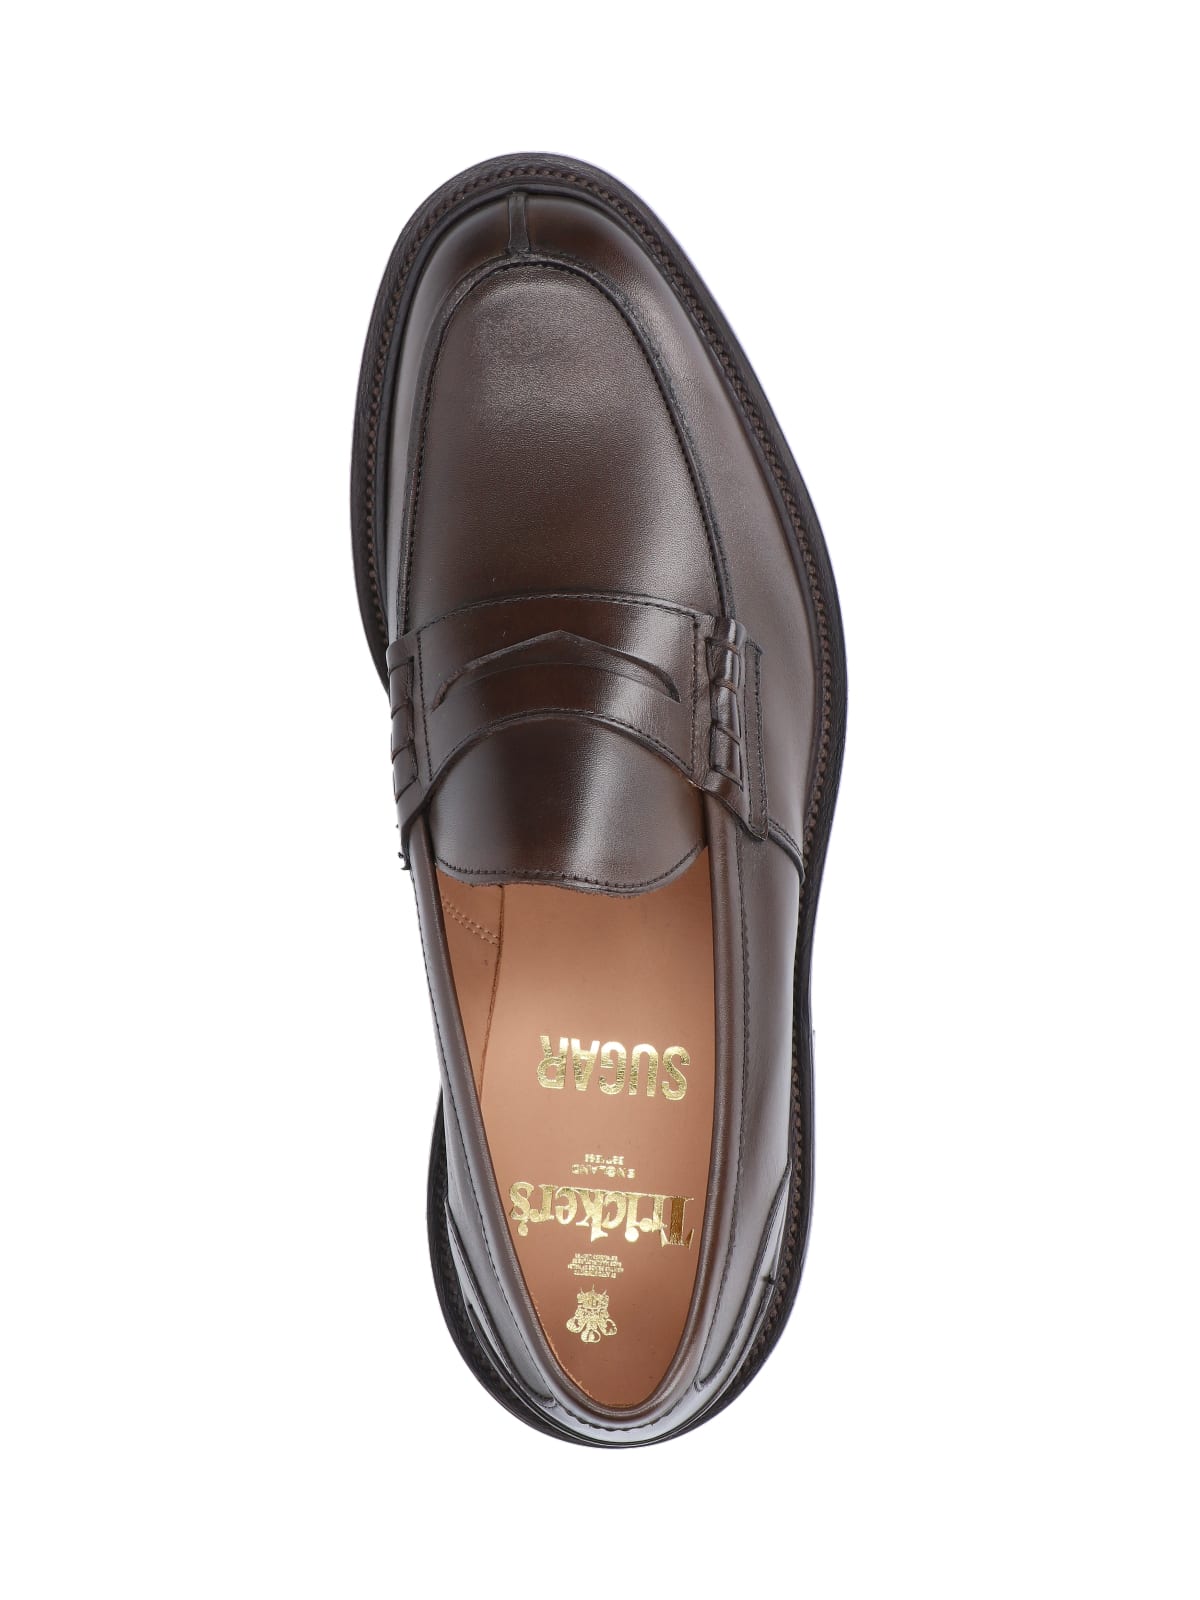 Shop Tricker's James Loafers In Brown